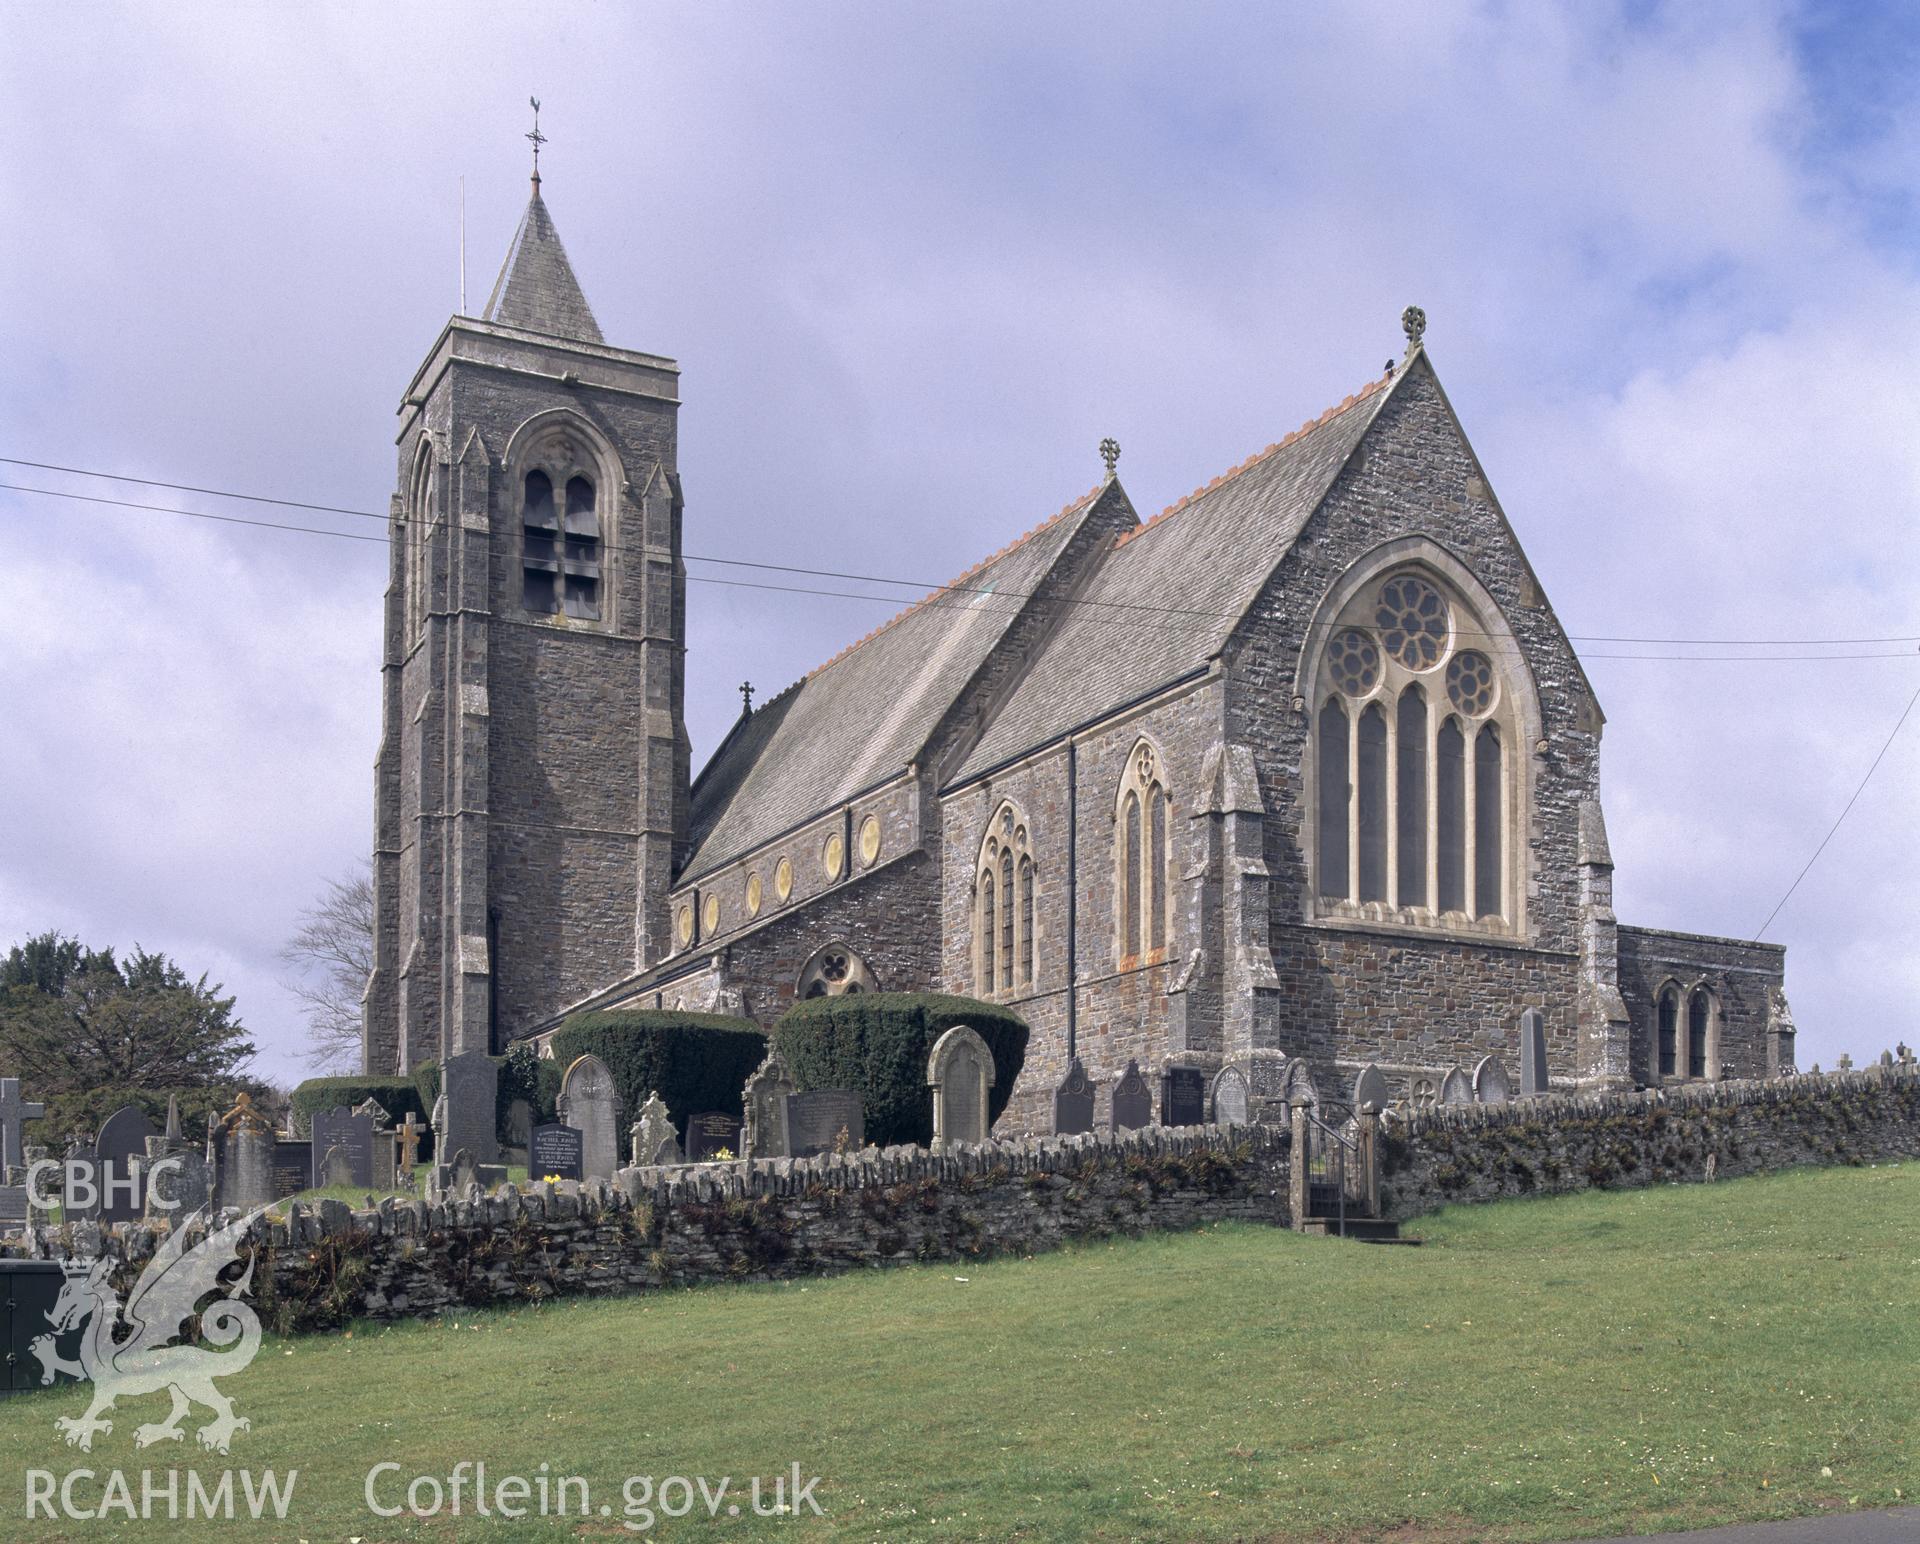 RCAHMW colour transparency showing exterior view of St Peter's Church, Lampeter.